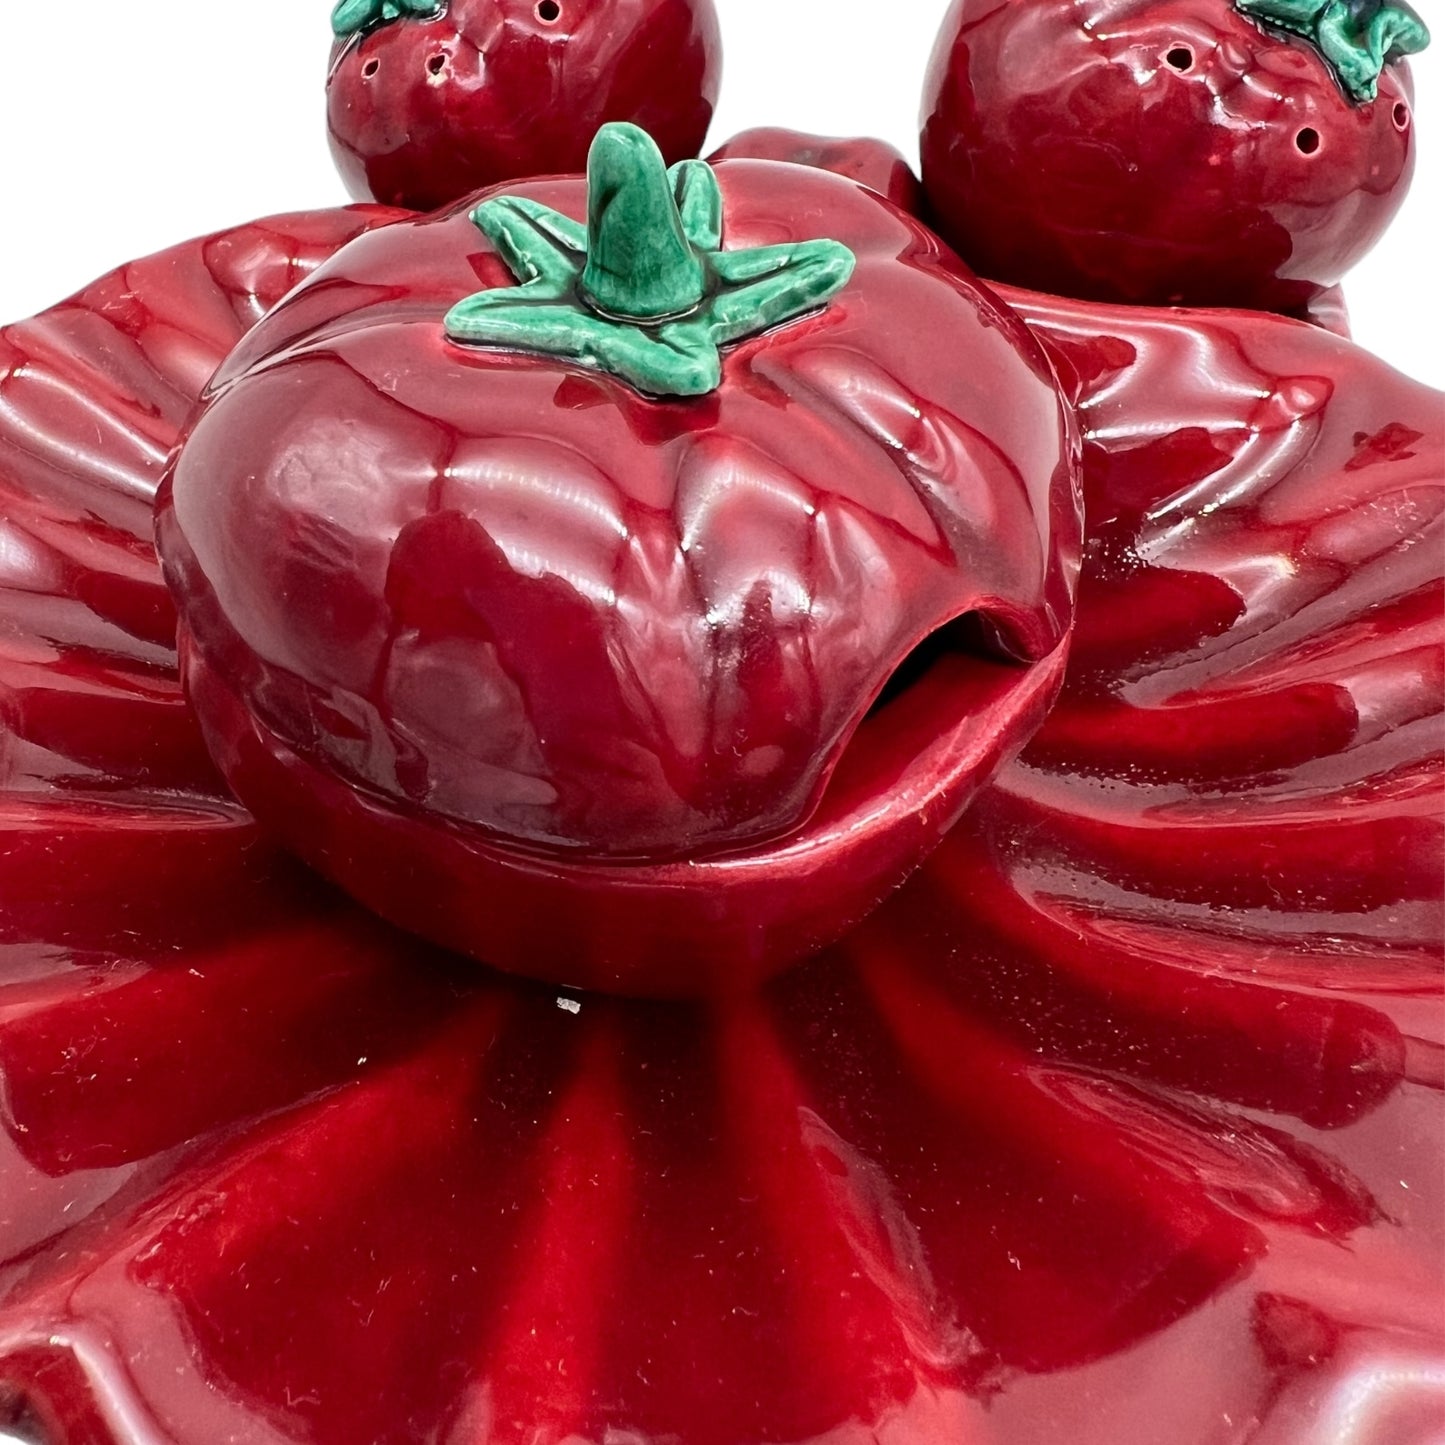 French Vallauris pottery cruet set in the shape of a tomato for sale 